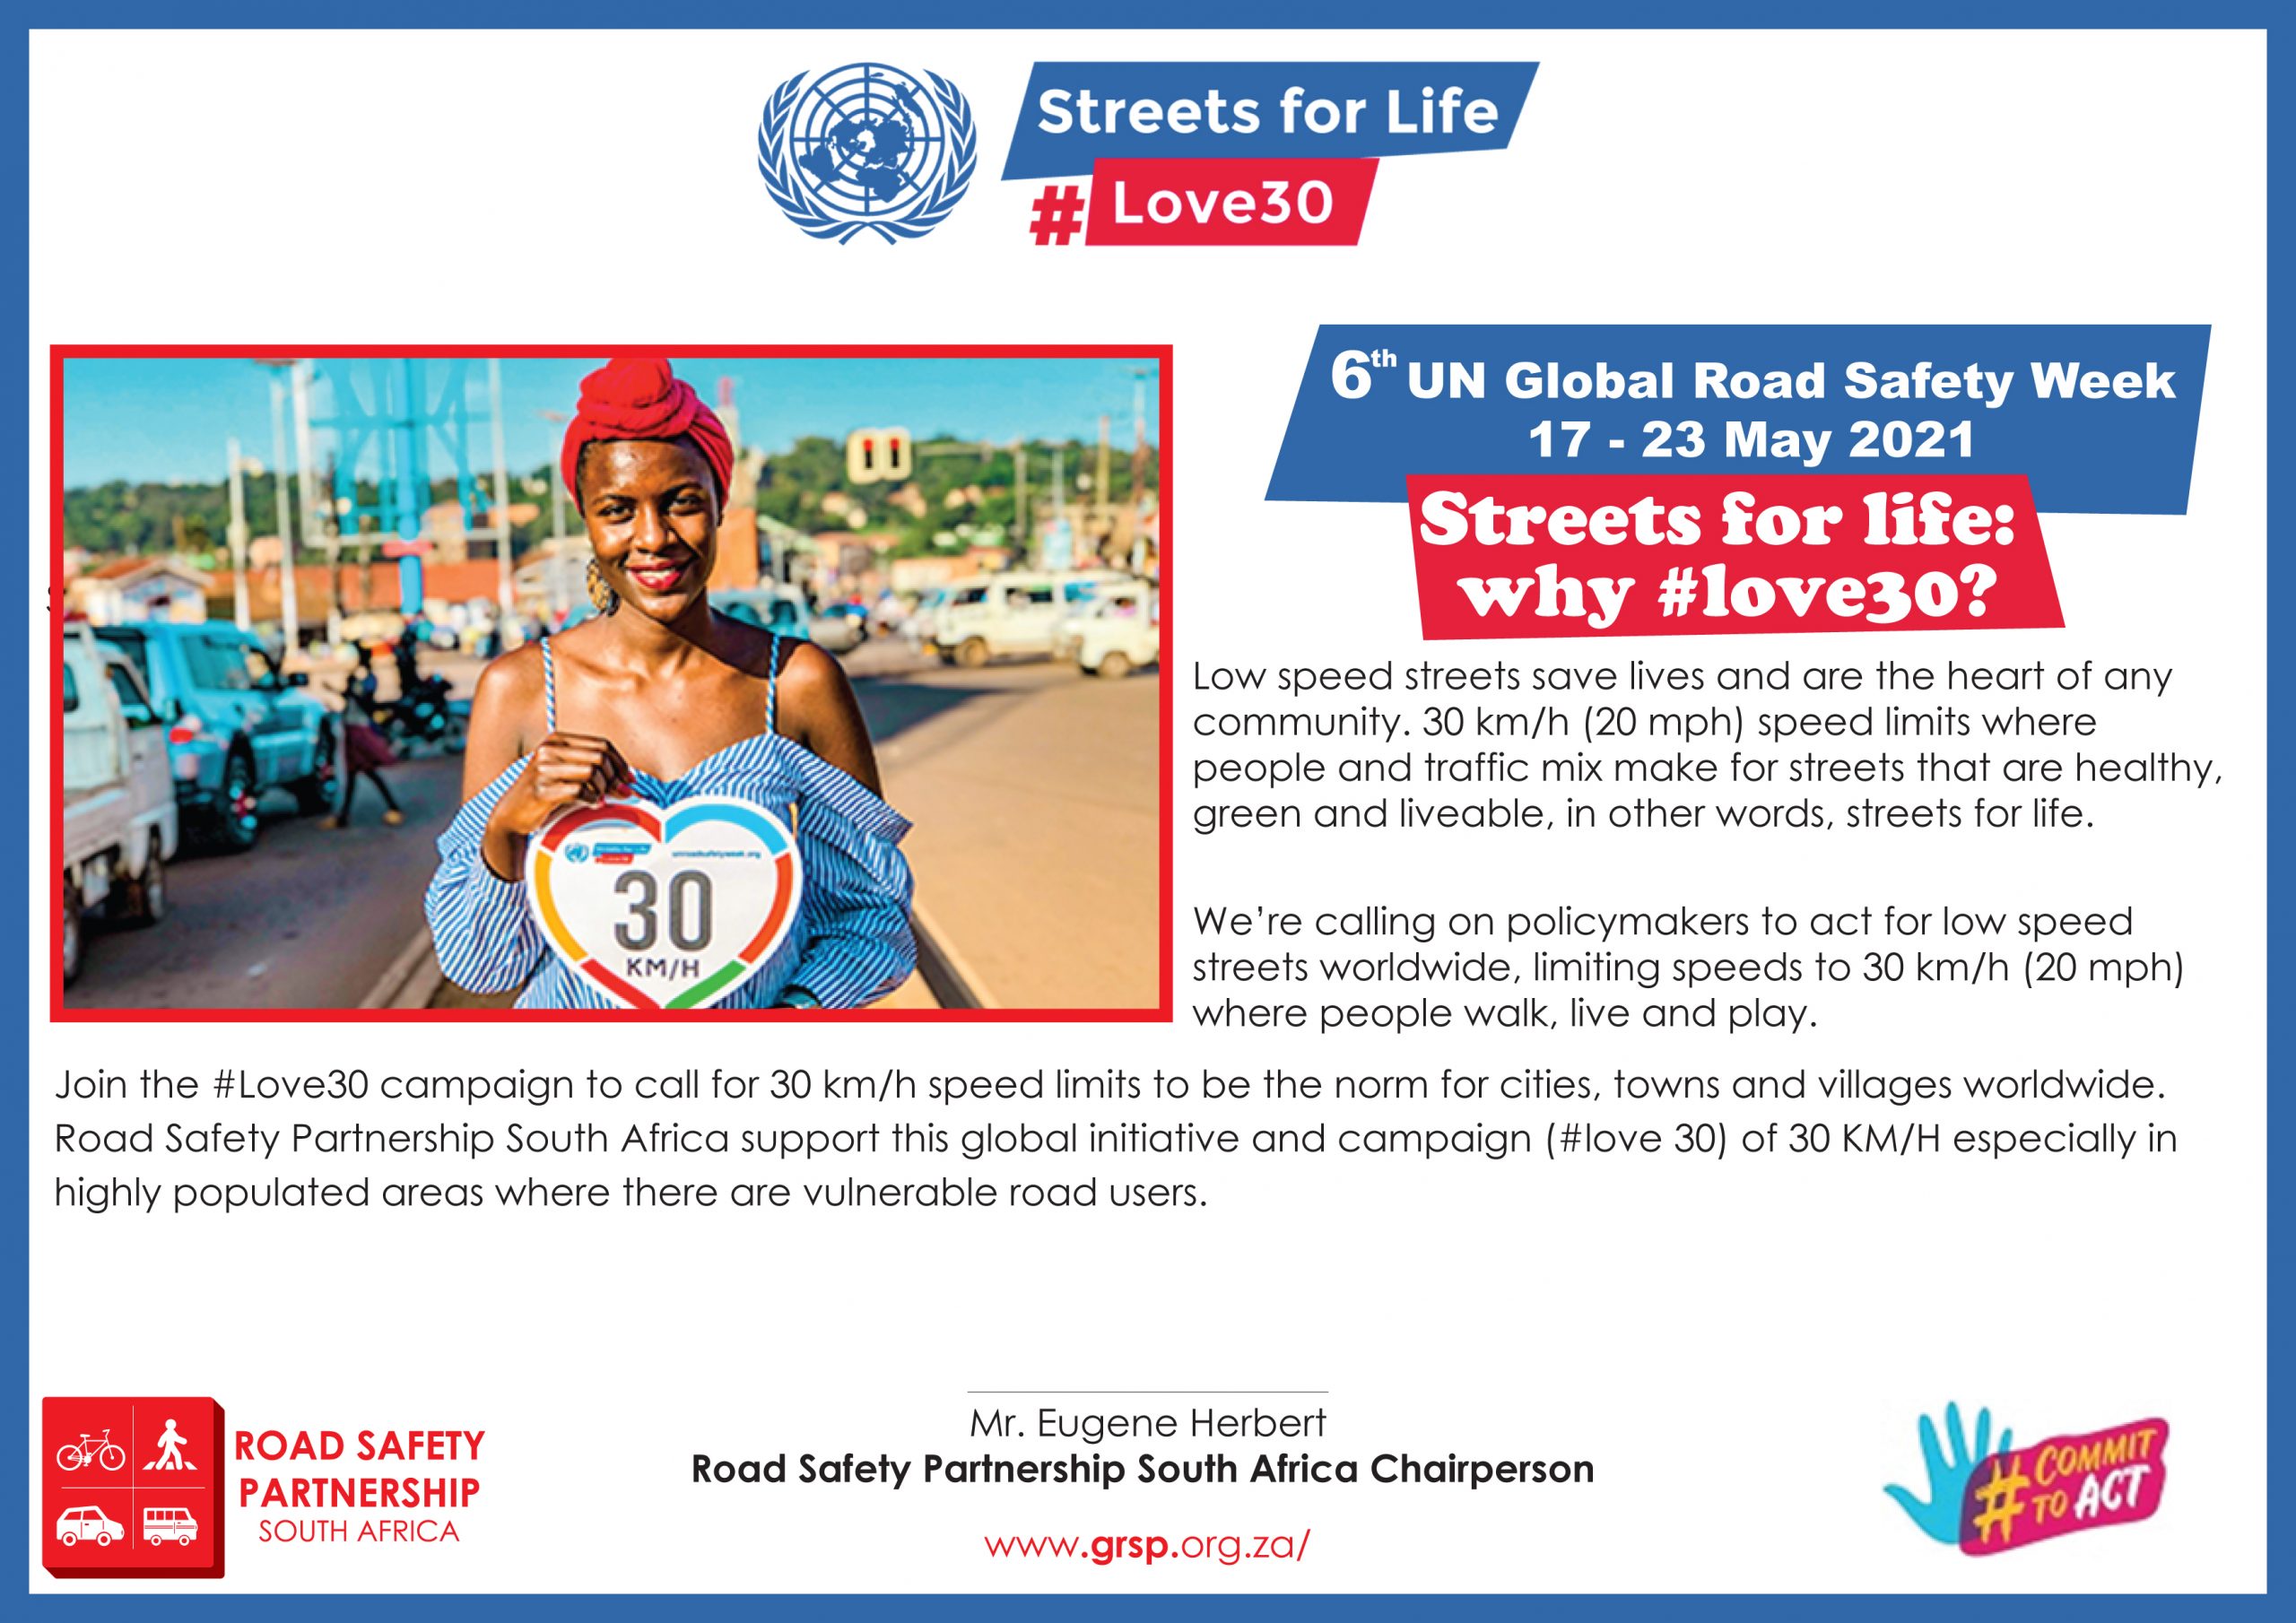 Road Safety Partnership (RSP) South Africa supports UN Global Road Safety Week